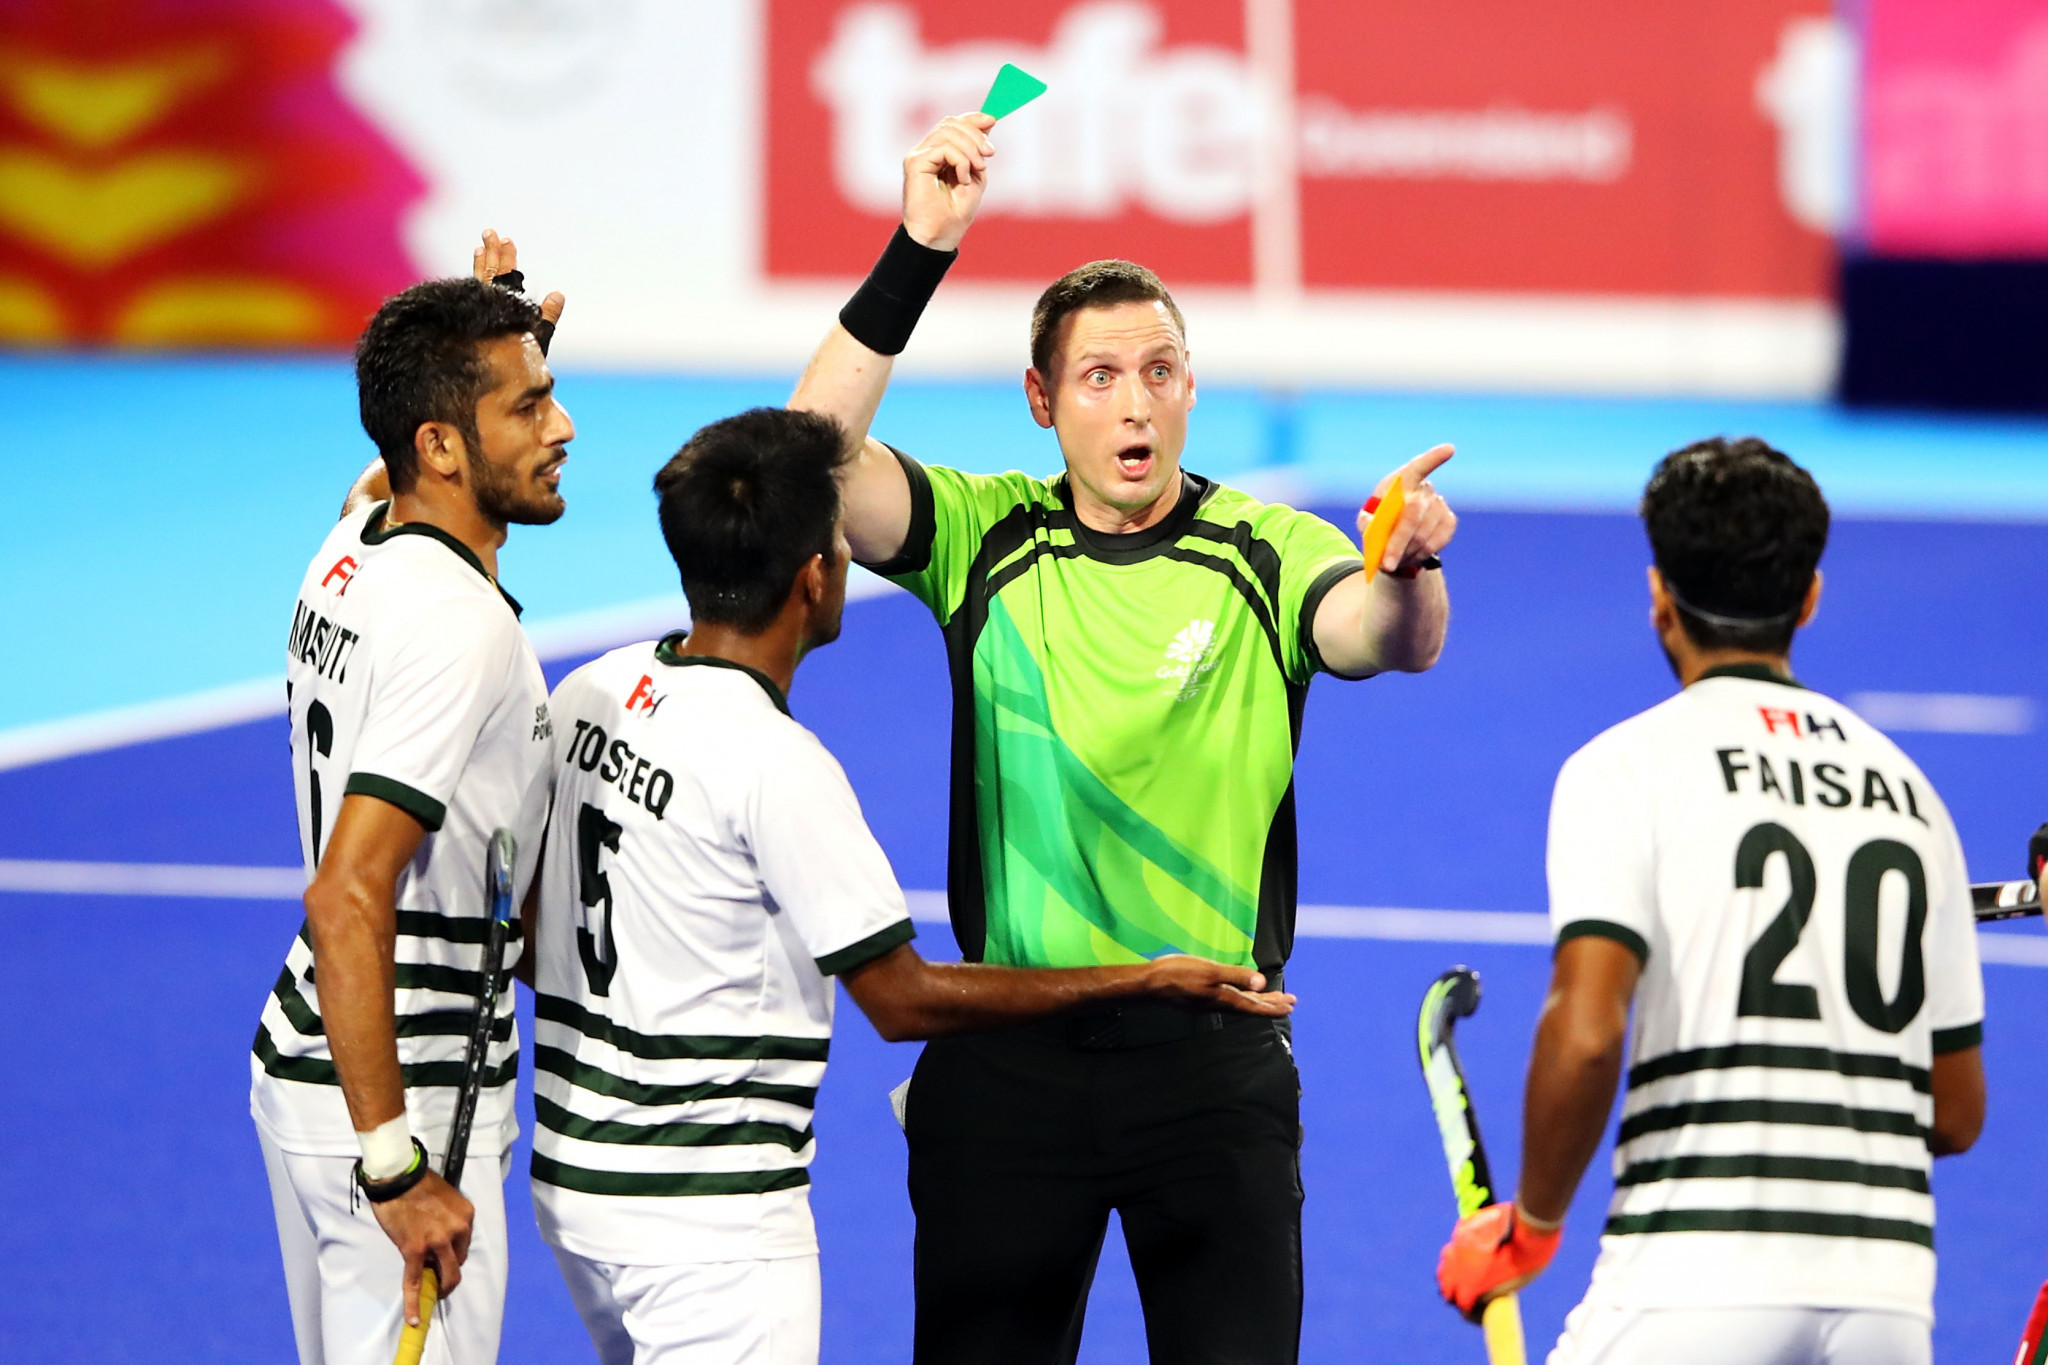 A development programme aimed at increasing the standard of officiating in hockey has been launched by the FIH ©Getty Images